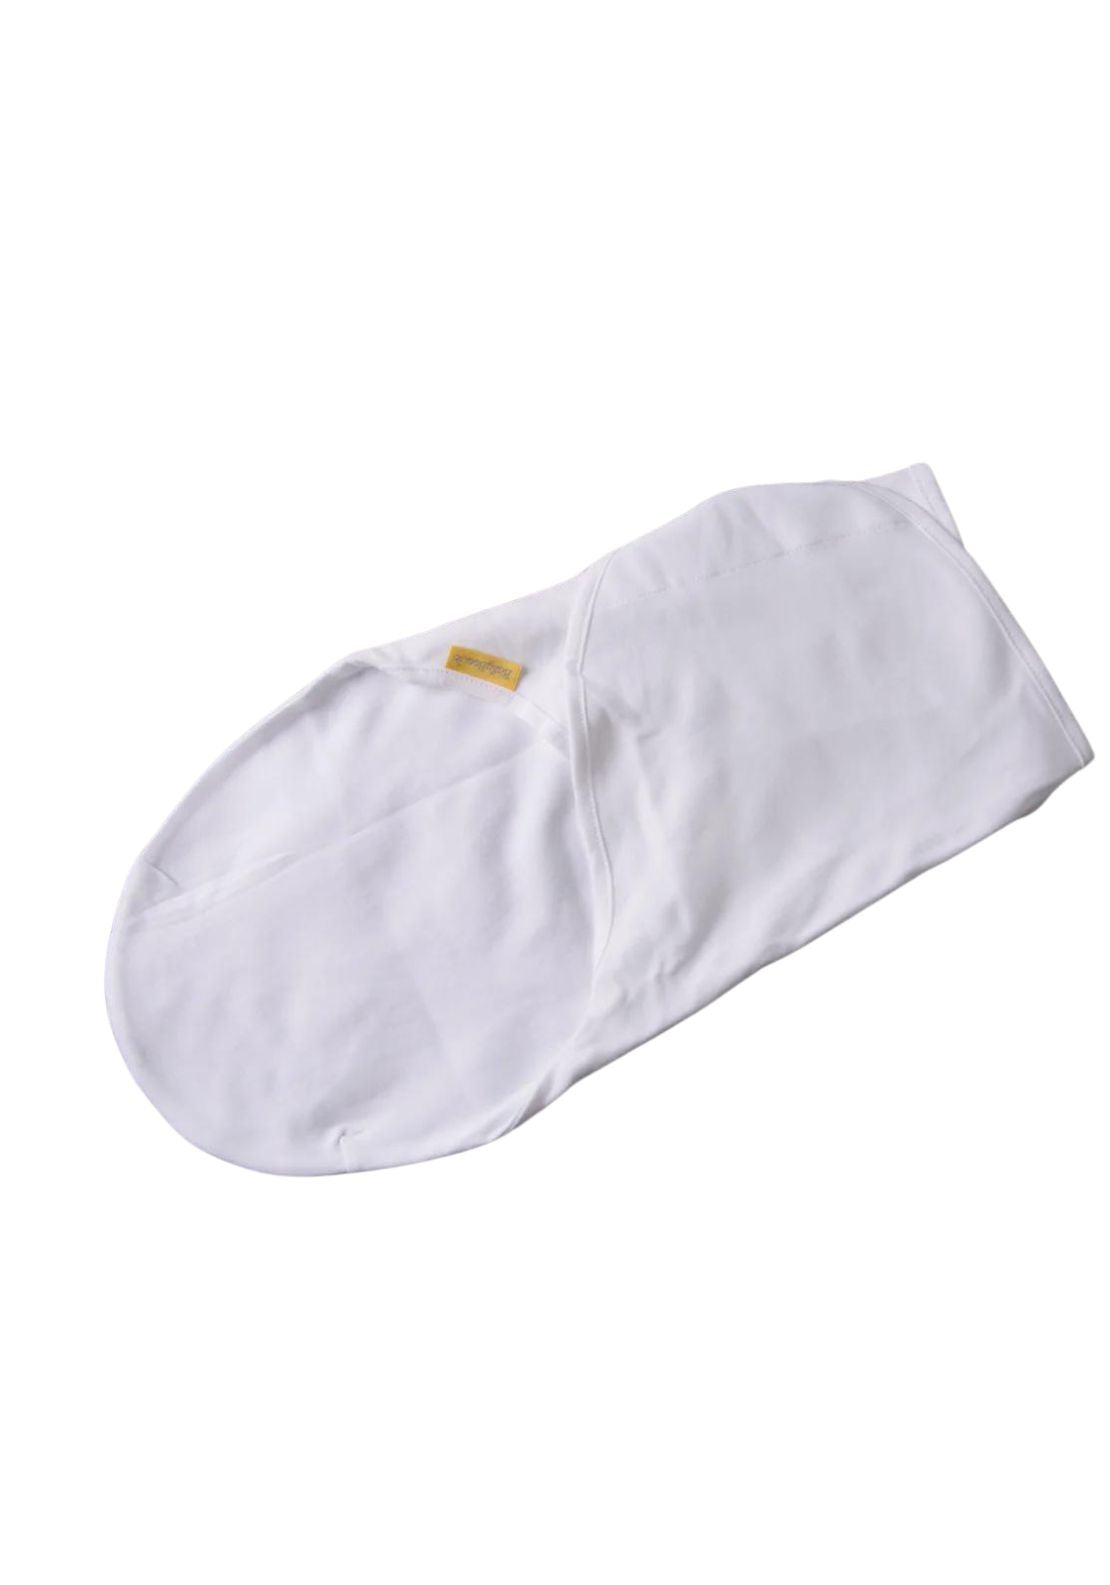 Babyboo Prewrapped Swaddle - White 1 Shaws Department Stores